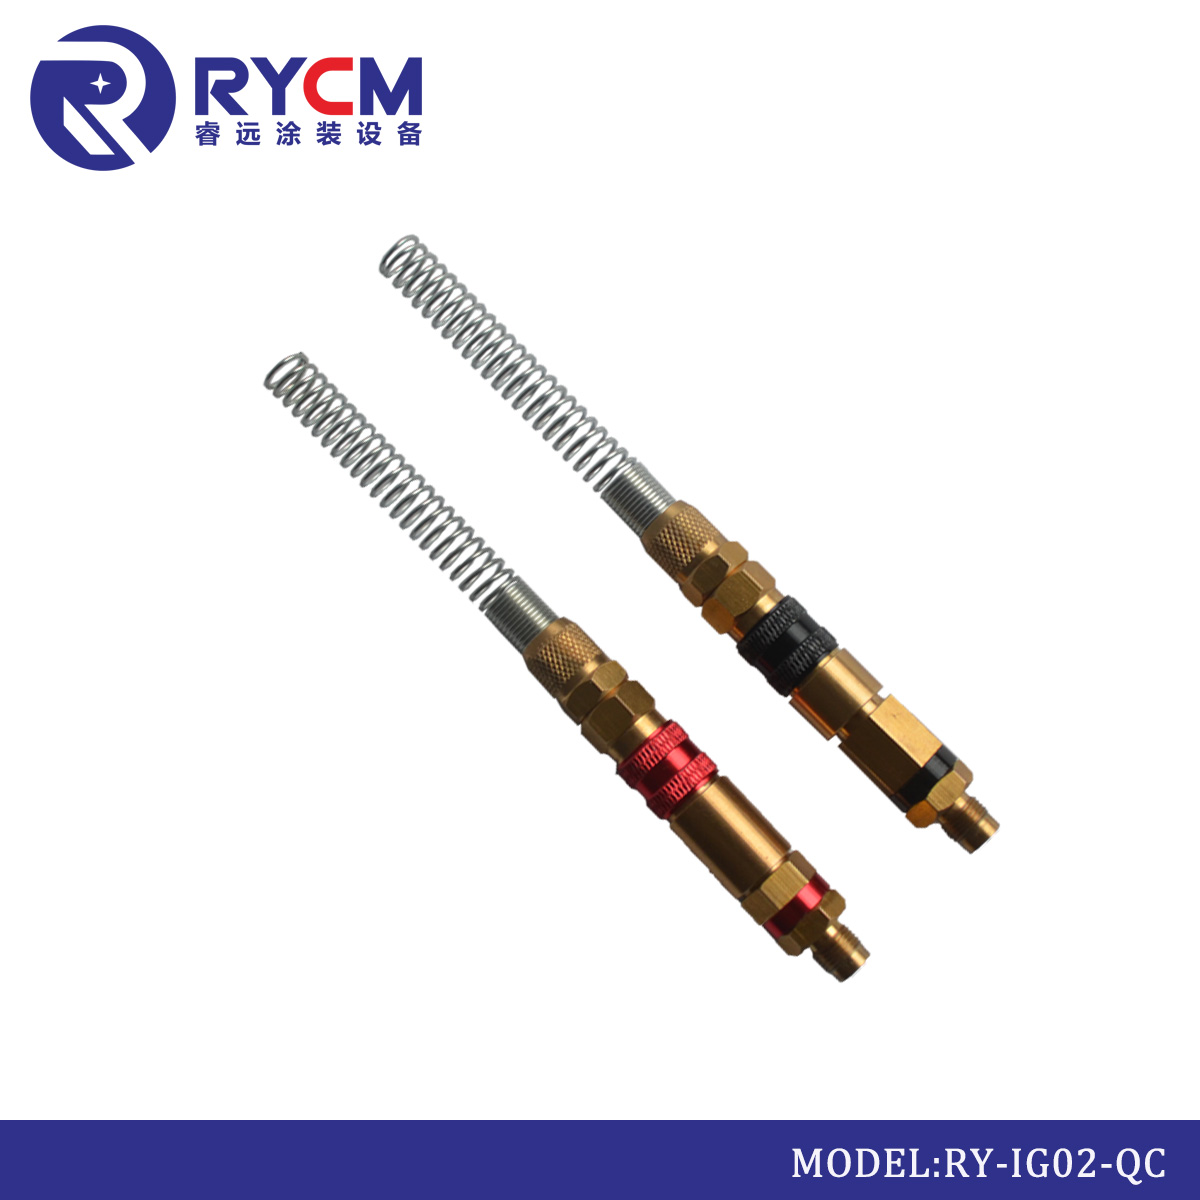 RY-IG02 Quick Release Coupling